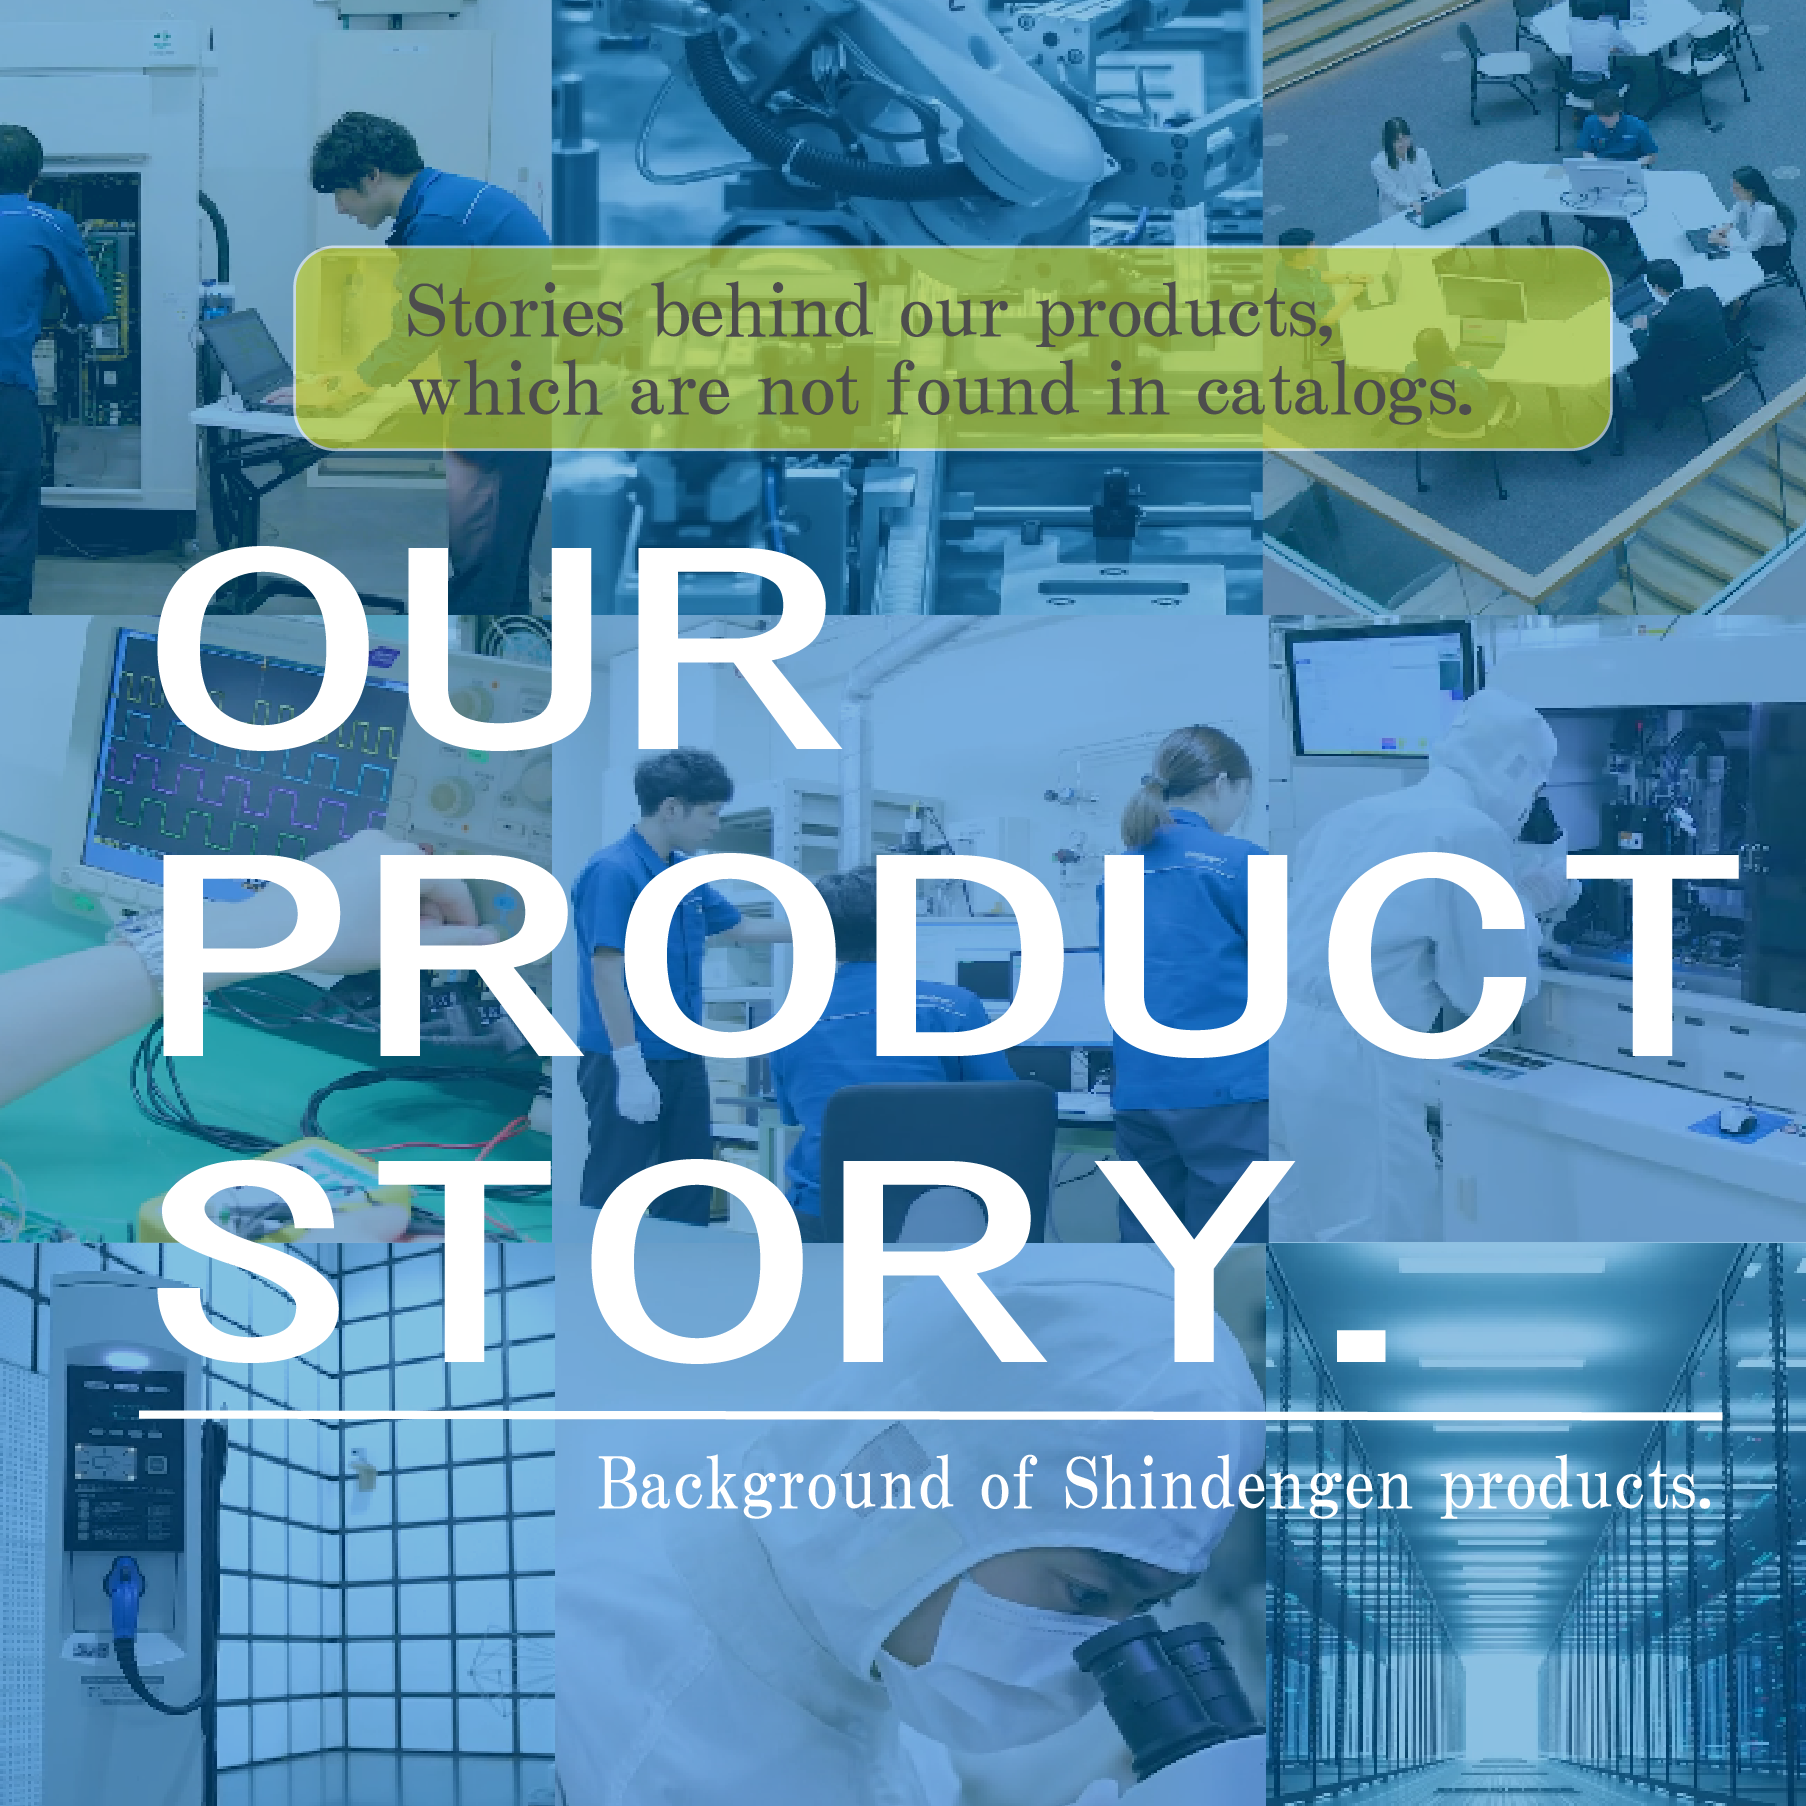 OUR PRODUCT STORY.